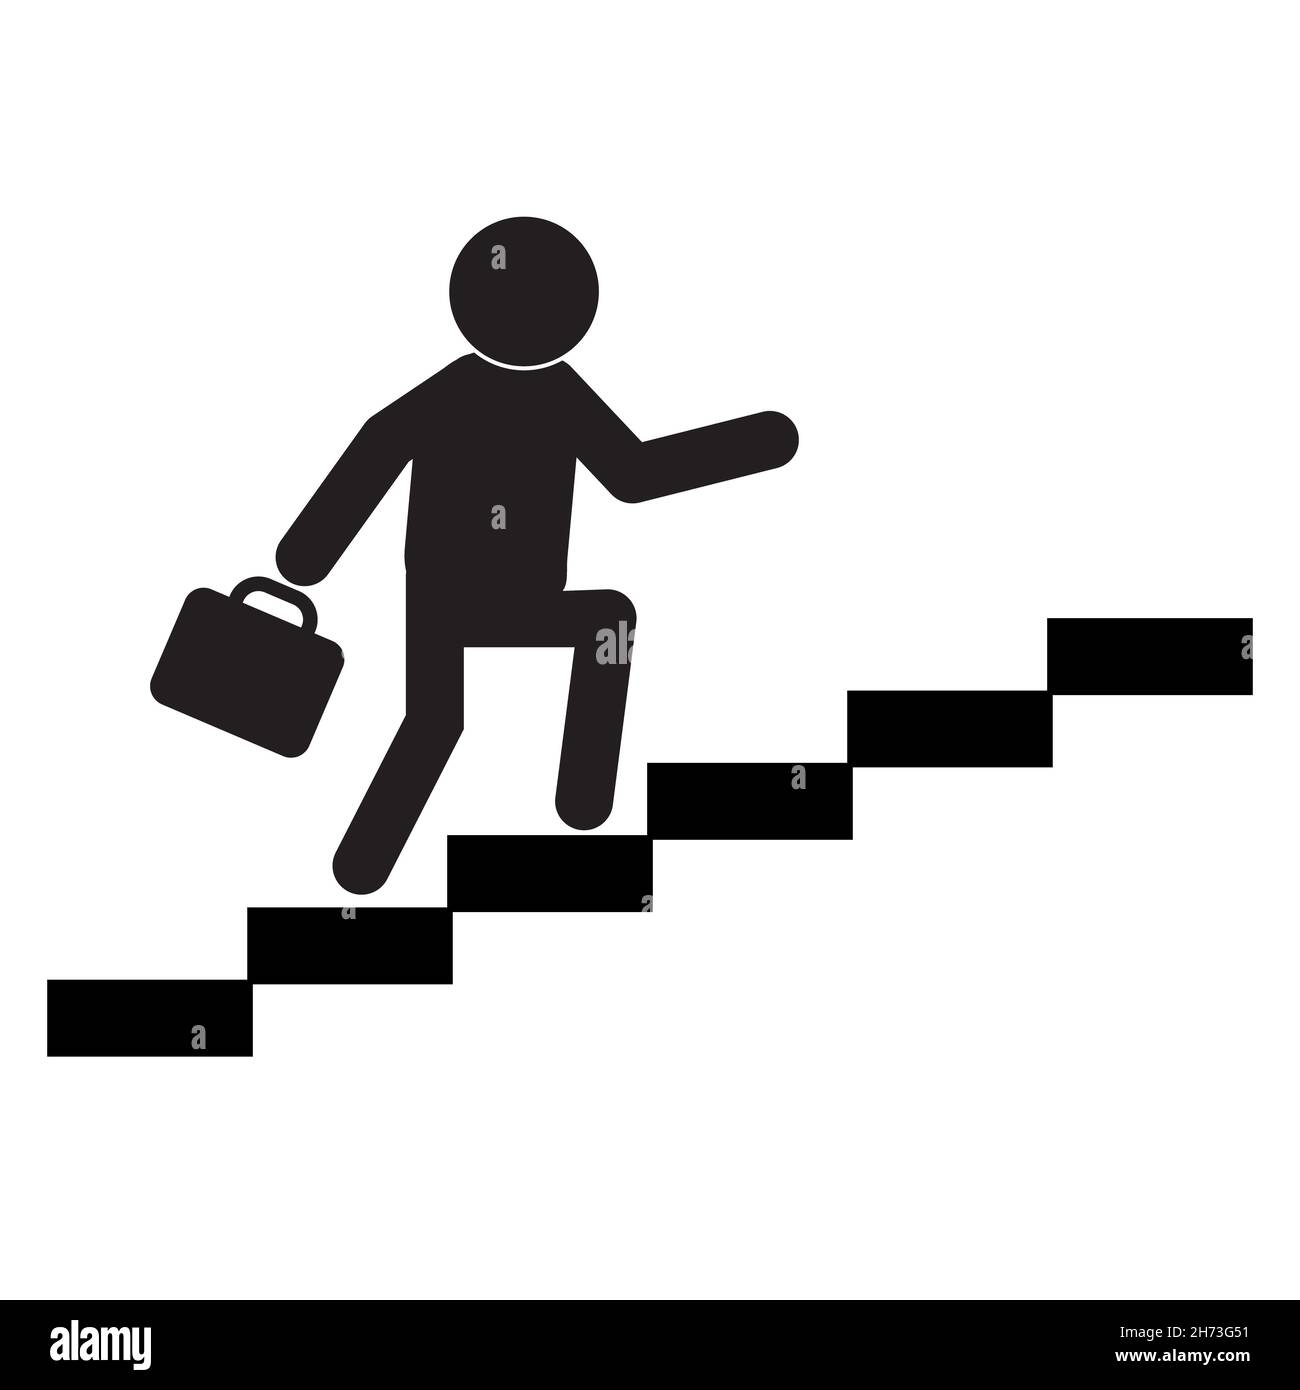 businessman walks up the stairs icon on white background. Business concept growth sign. flat style. Stock Photo